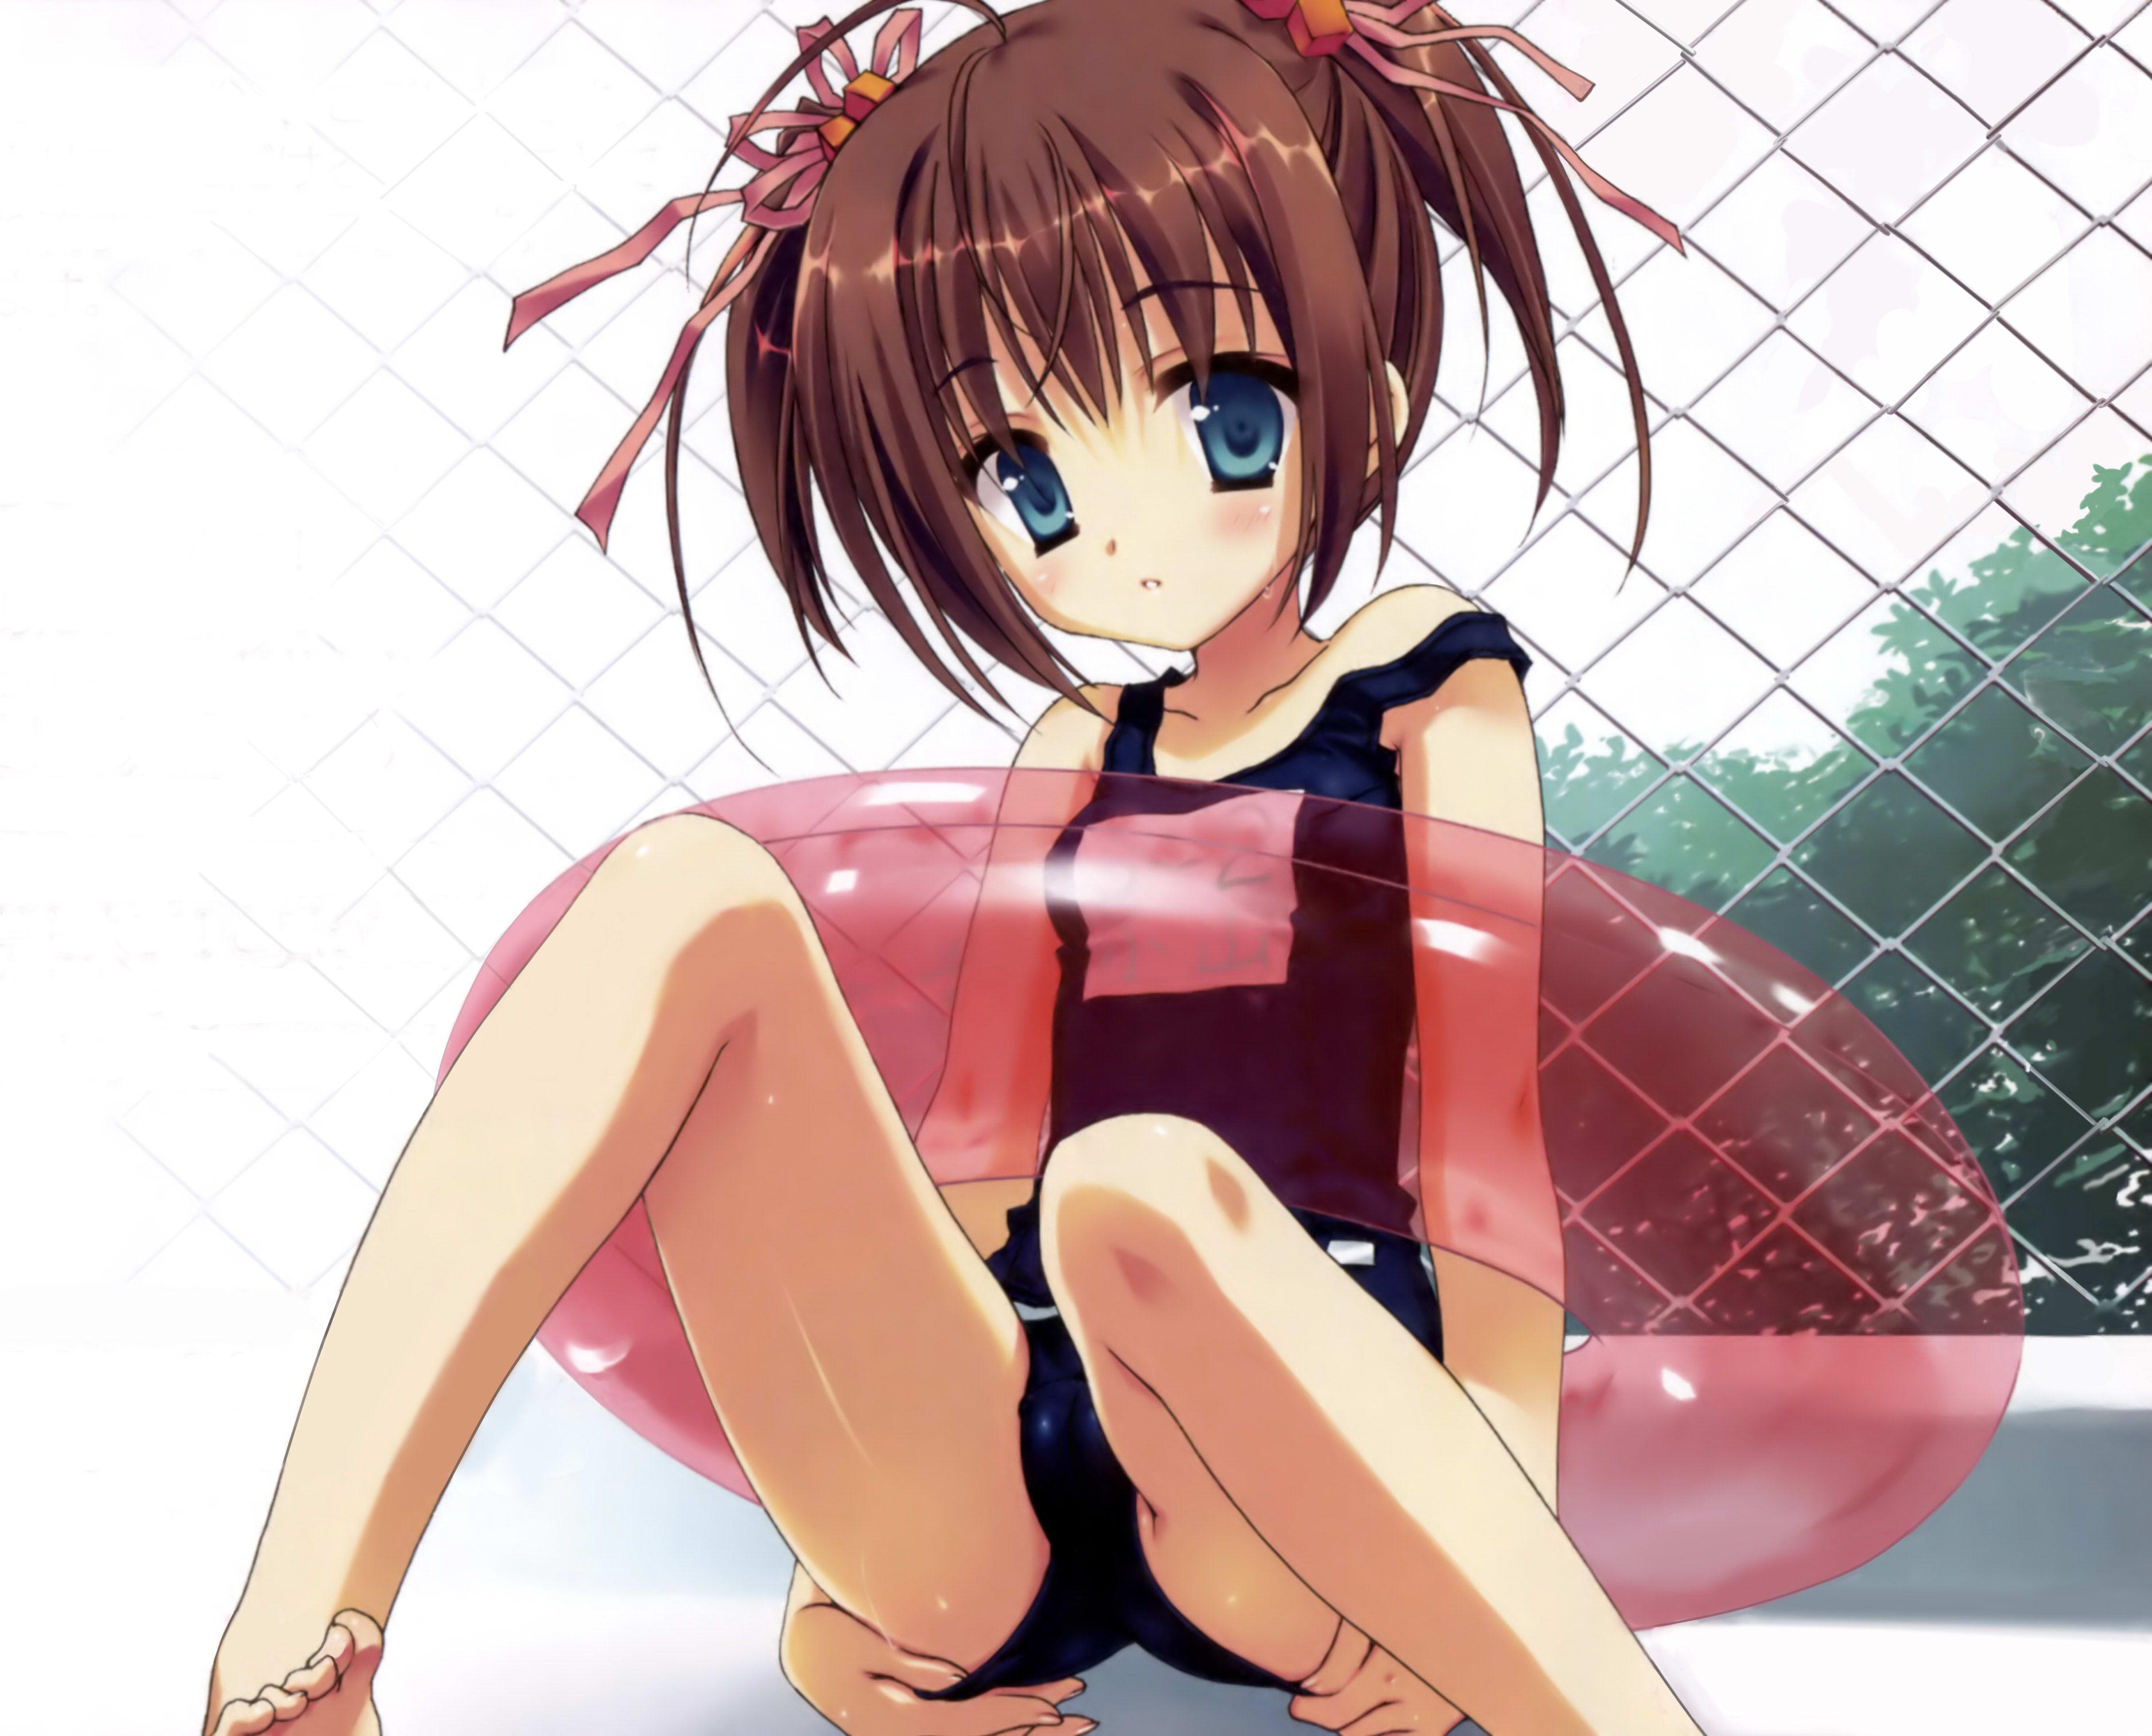 [Secondary/ZIP] Second erotic image of a girl wearing a swimsuit 14 22